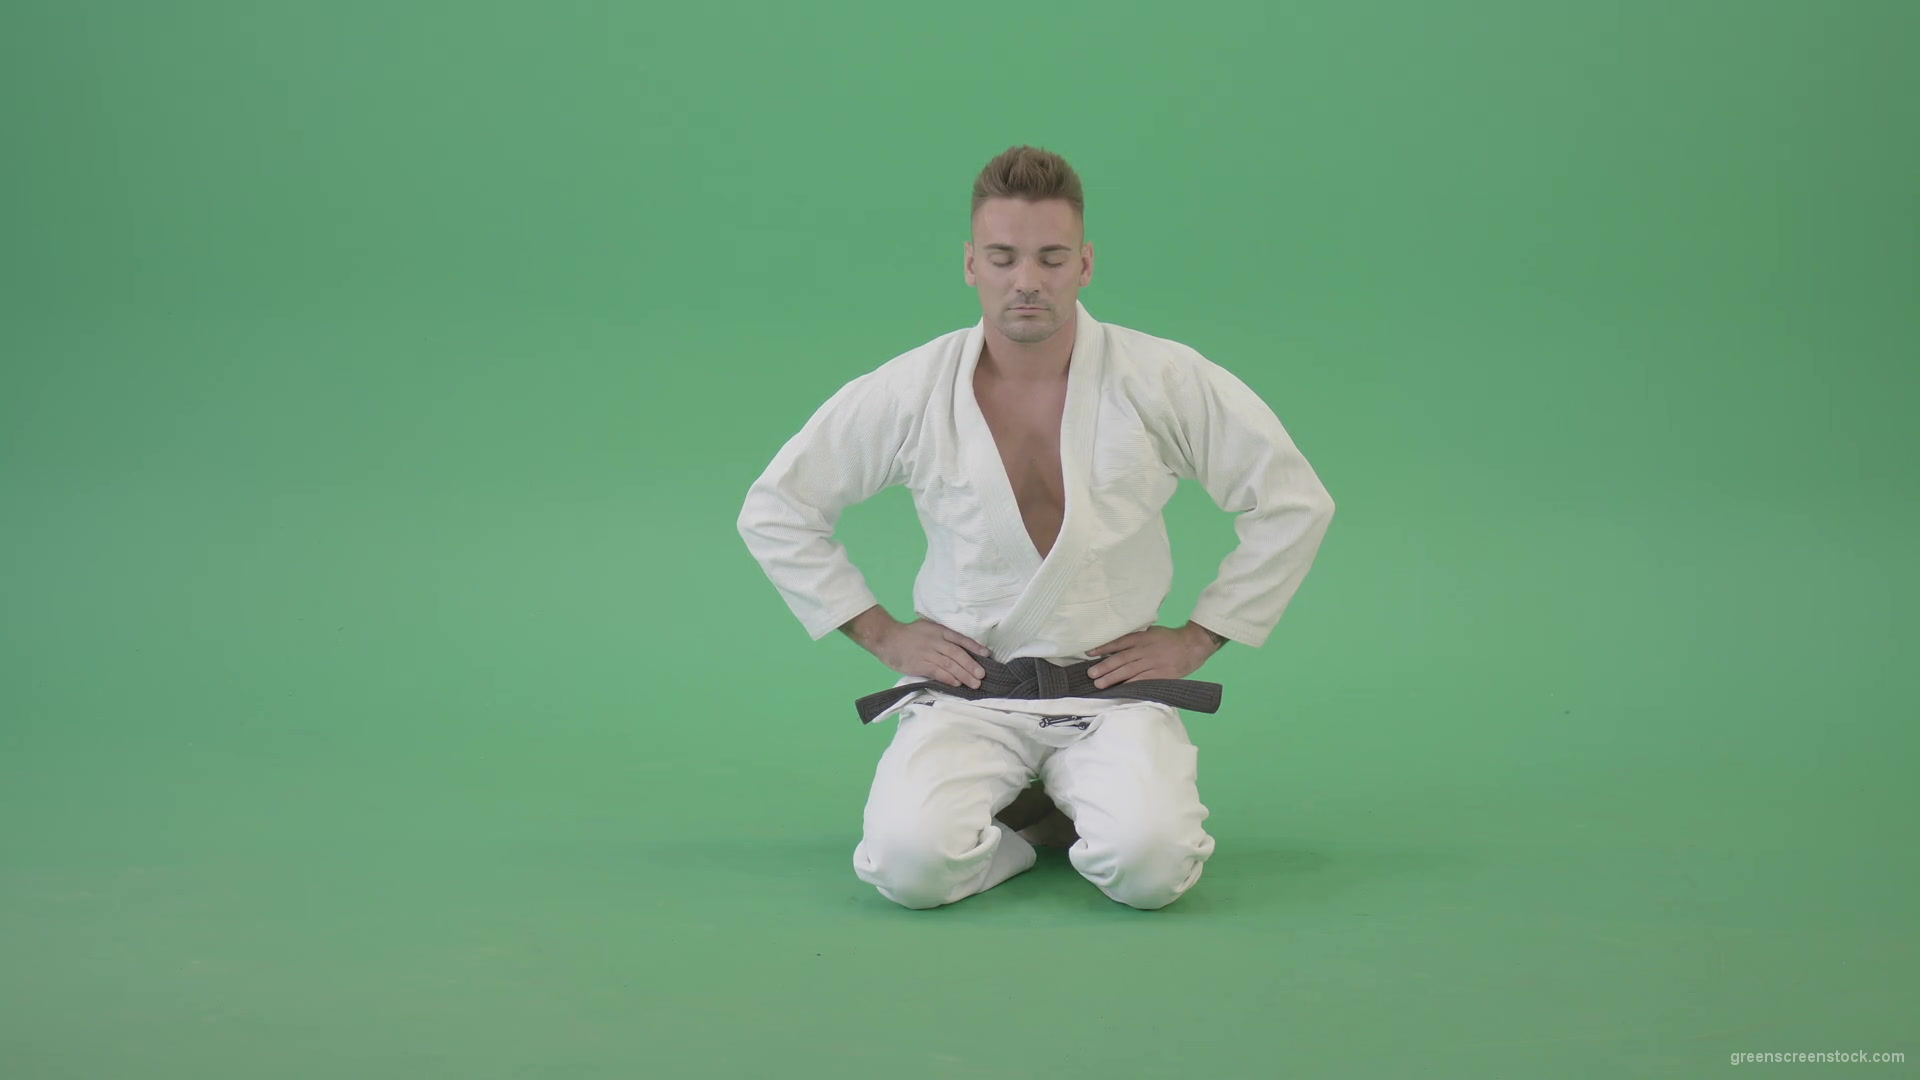 Jujutsu-Sport-man-meditating-and-breathing-slowly-isolated-on-green-screen-4K-Video-Footage-1920_004 Green Screen Stock